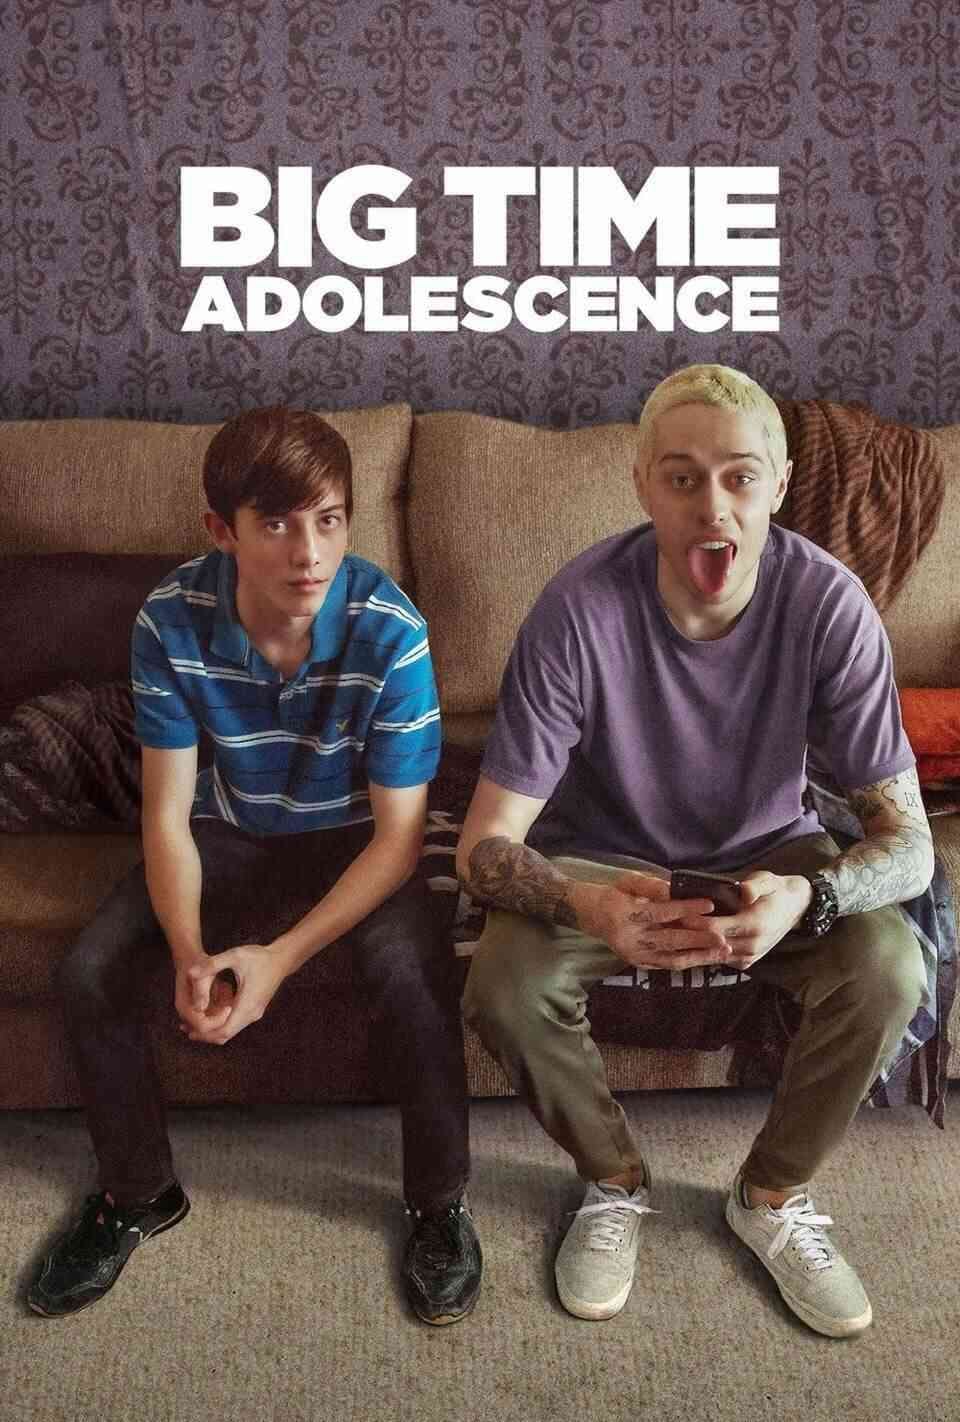 Read Big Time Adolescence screenplay (poster)